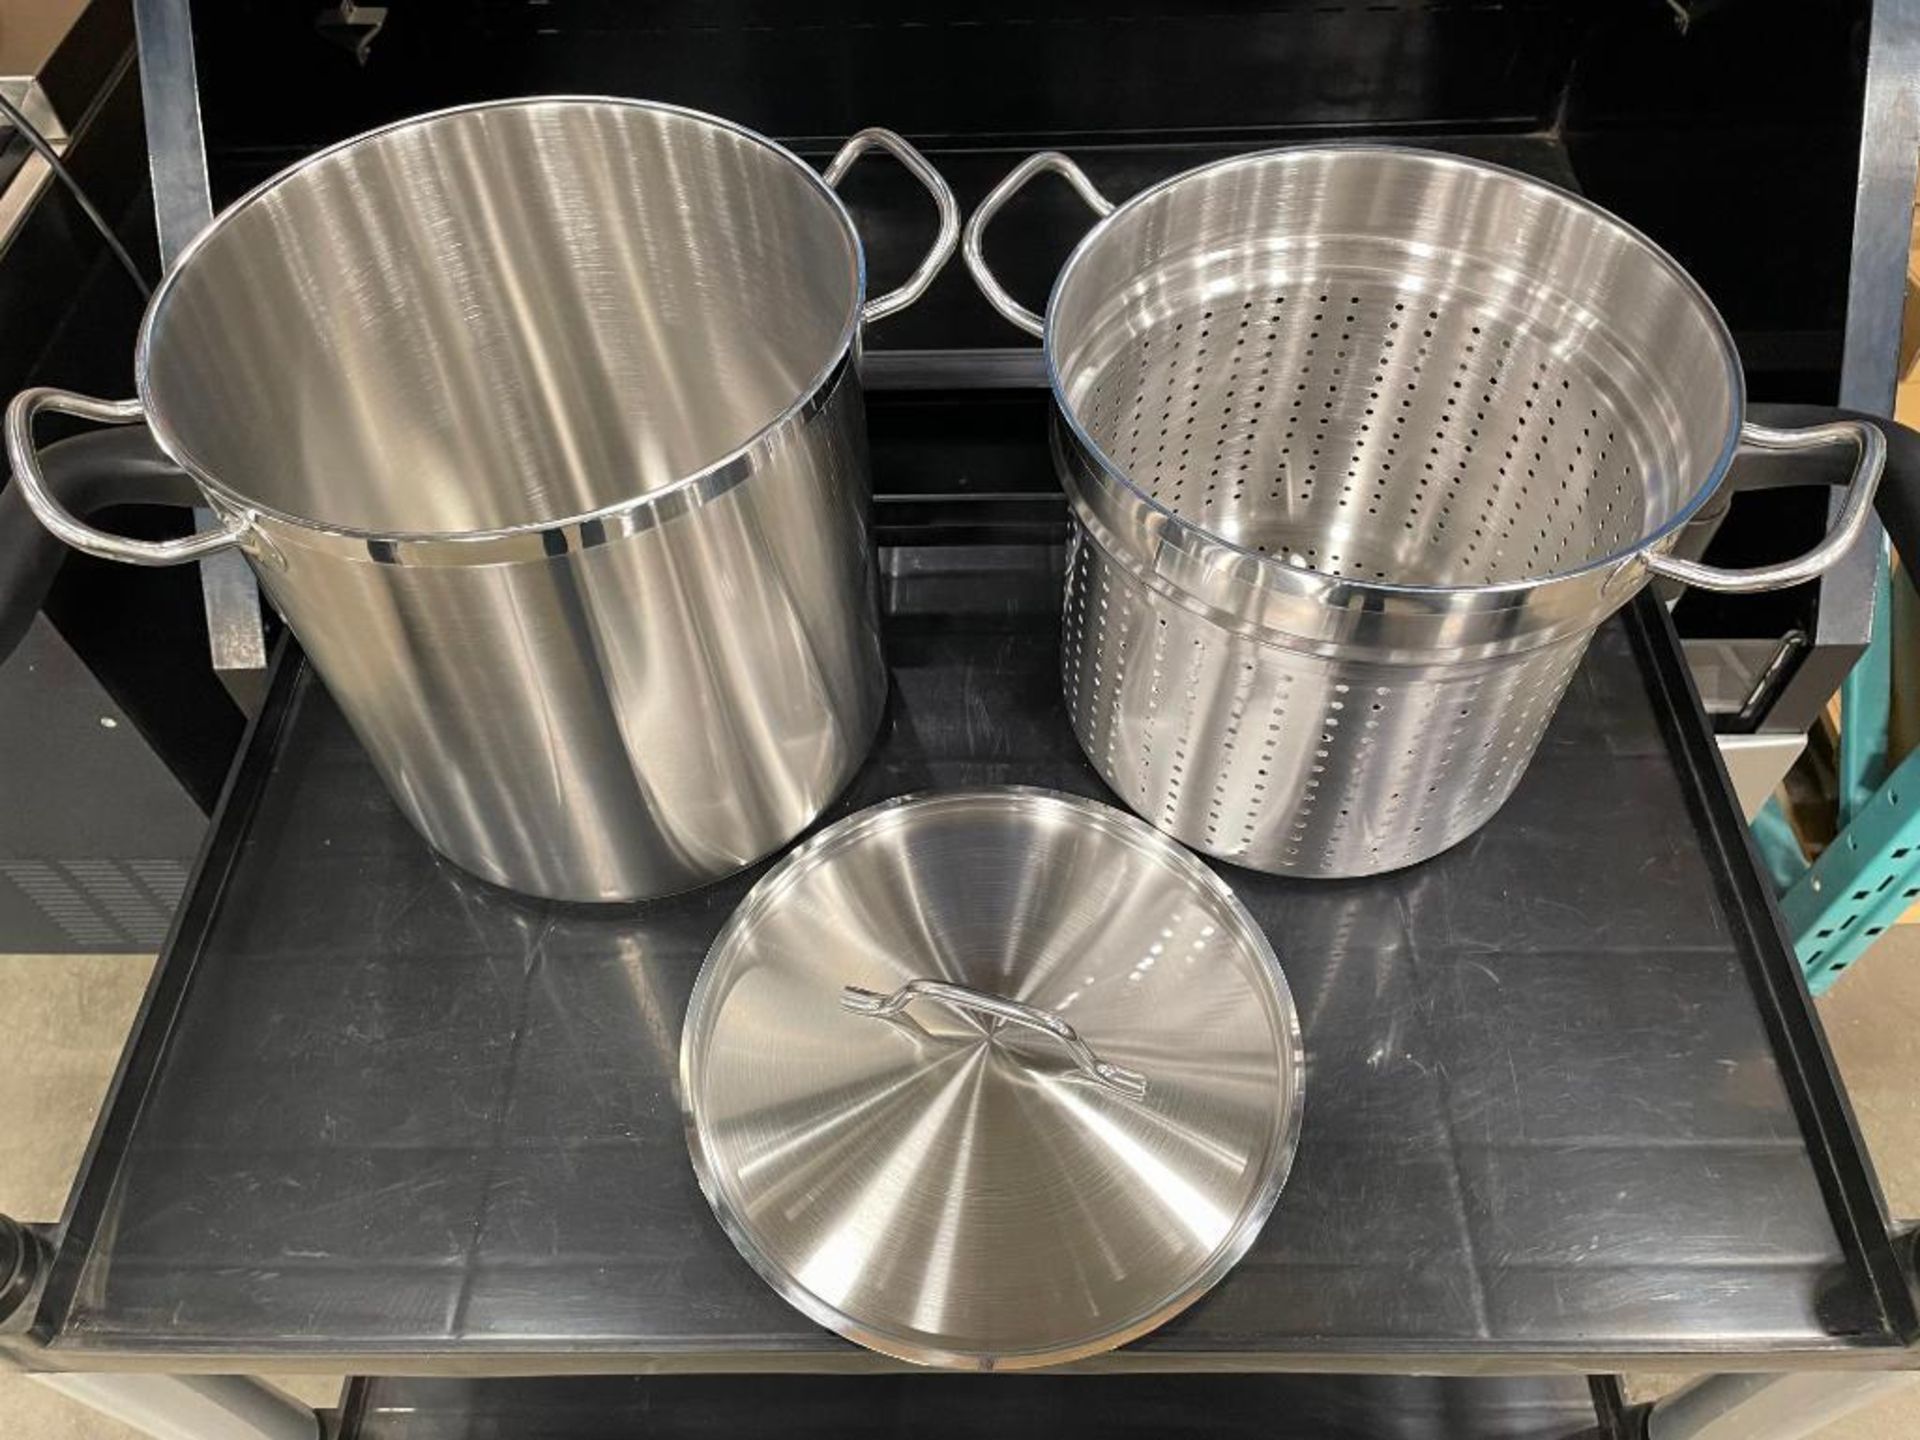 20QT HEAVY DUTY STAINLESS STOCK POT INDUCTION CAPABLE & STEAMER BASKET, JR 47202 & 47204 - NEW - Image 3 of 6